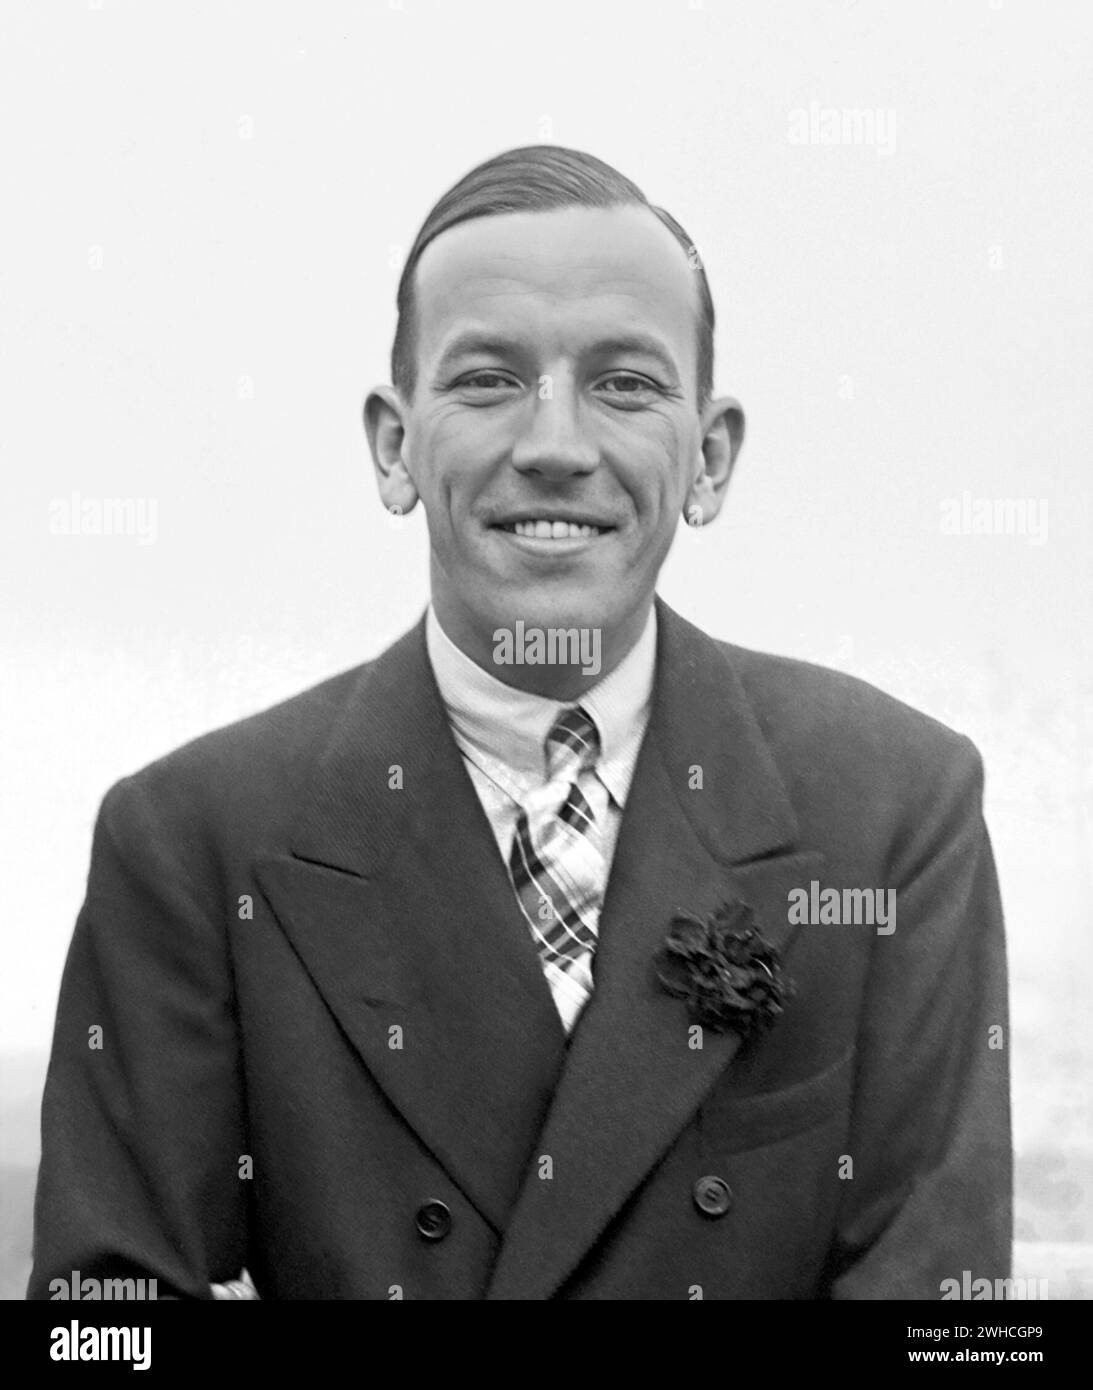 Noel Coward. Portrait of the English playwright, composer and singer,  Sir Noël Peirce Coward  (1899-1973). Photo from Bain News Service, c.1925. Stock Photo